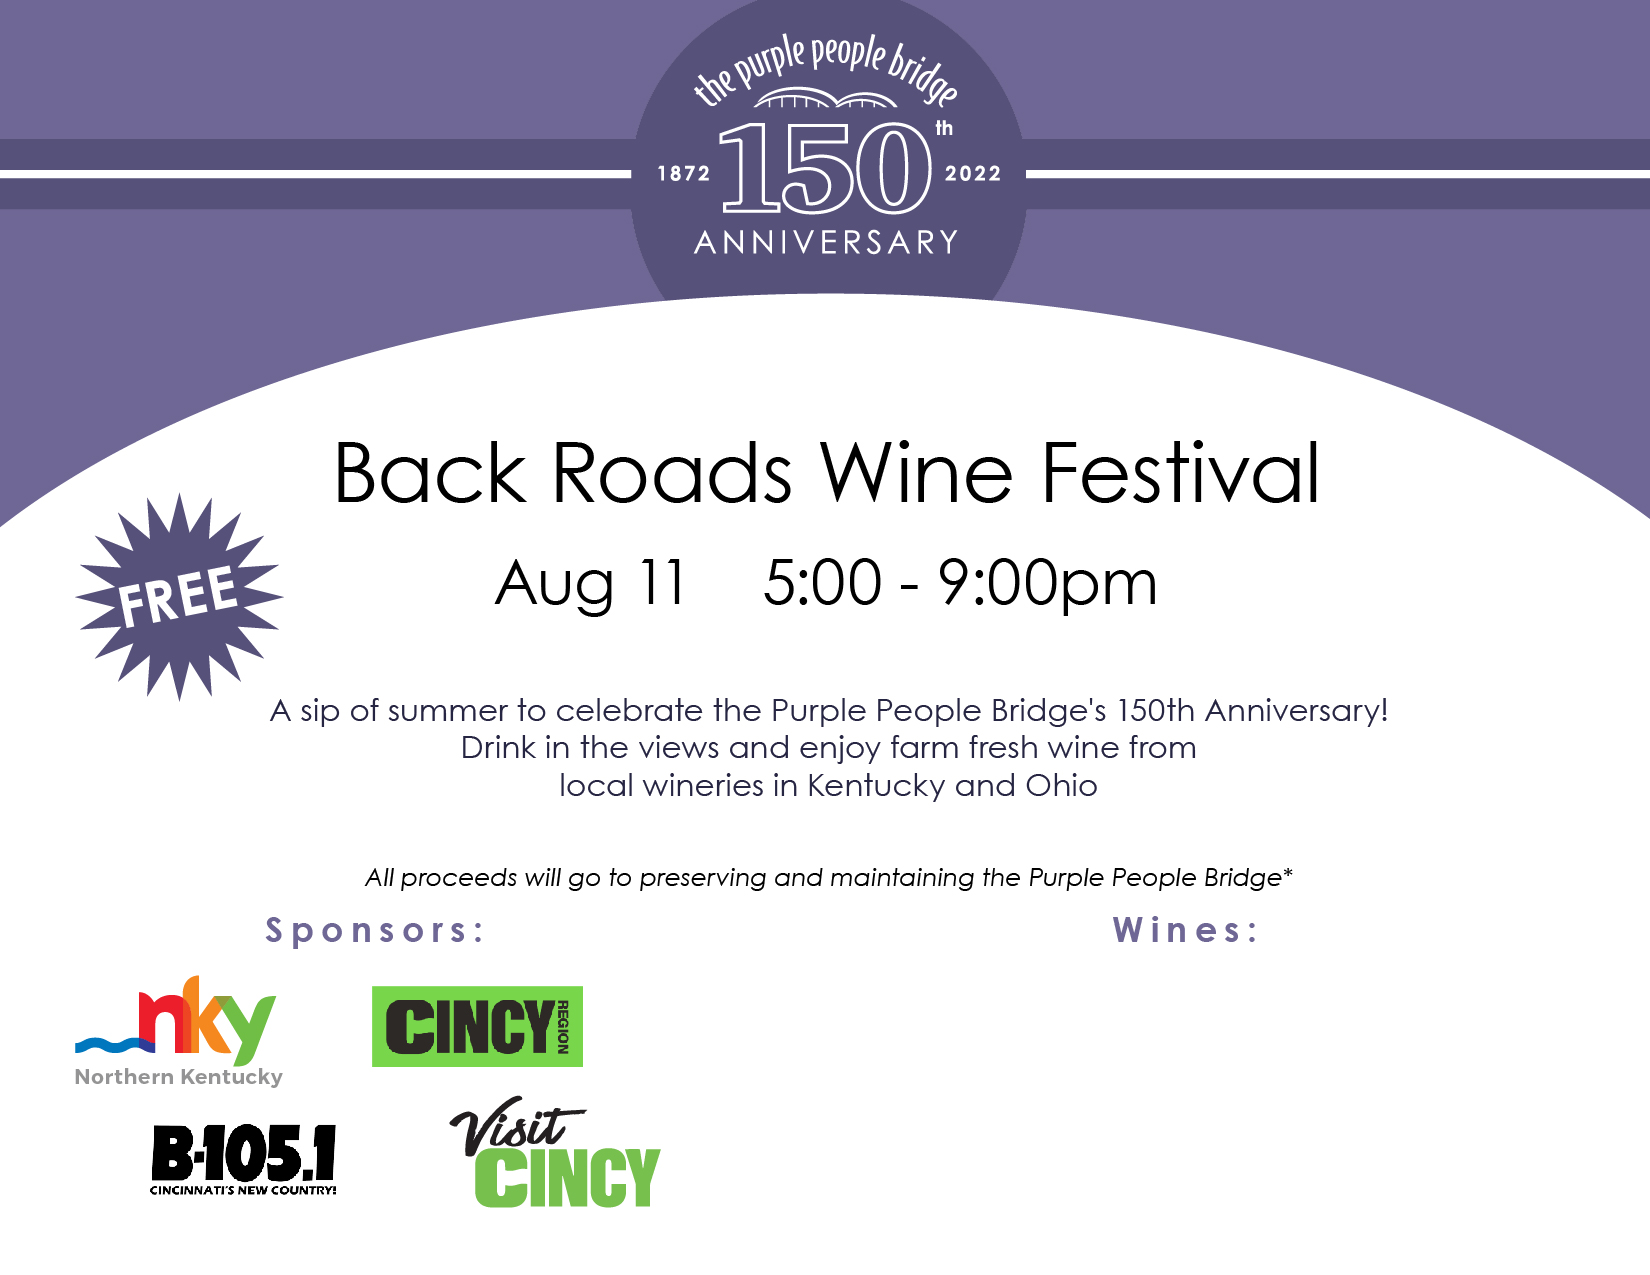 Back Roads Wine Festival | Aug 11 | 5:00 - 9:00pm | A sip of summer to celebrate the Purple People Bridge's 150th Anniversary! Drink in the views and enjoy farm fresh wine from local wineries in Kentucky and Ohio. |. All proceeds will go to preserving and maintaining the Purple People Bridge*